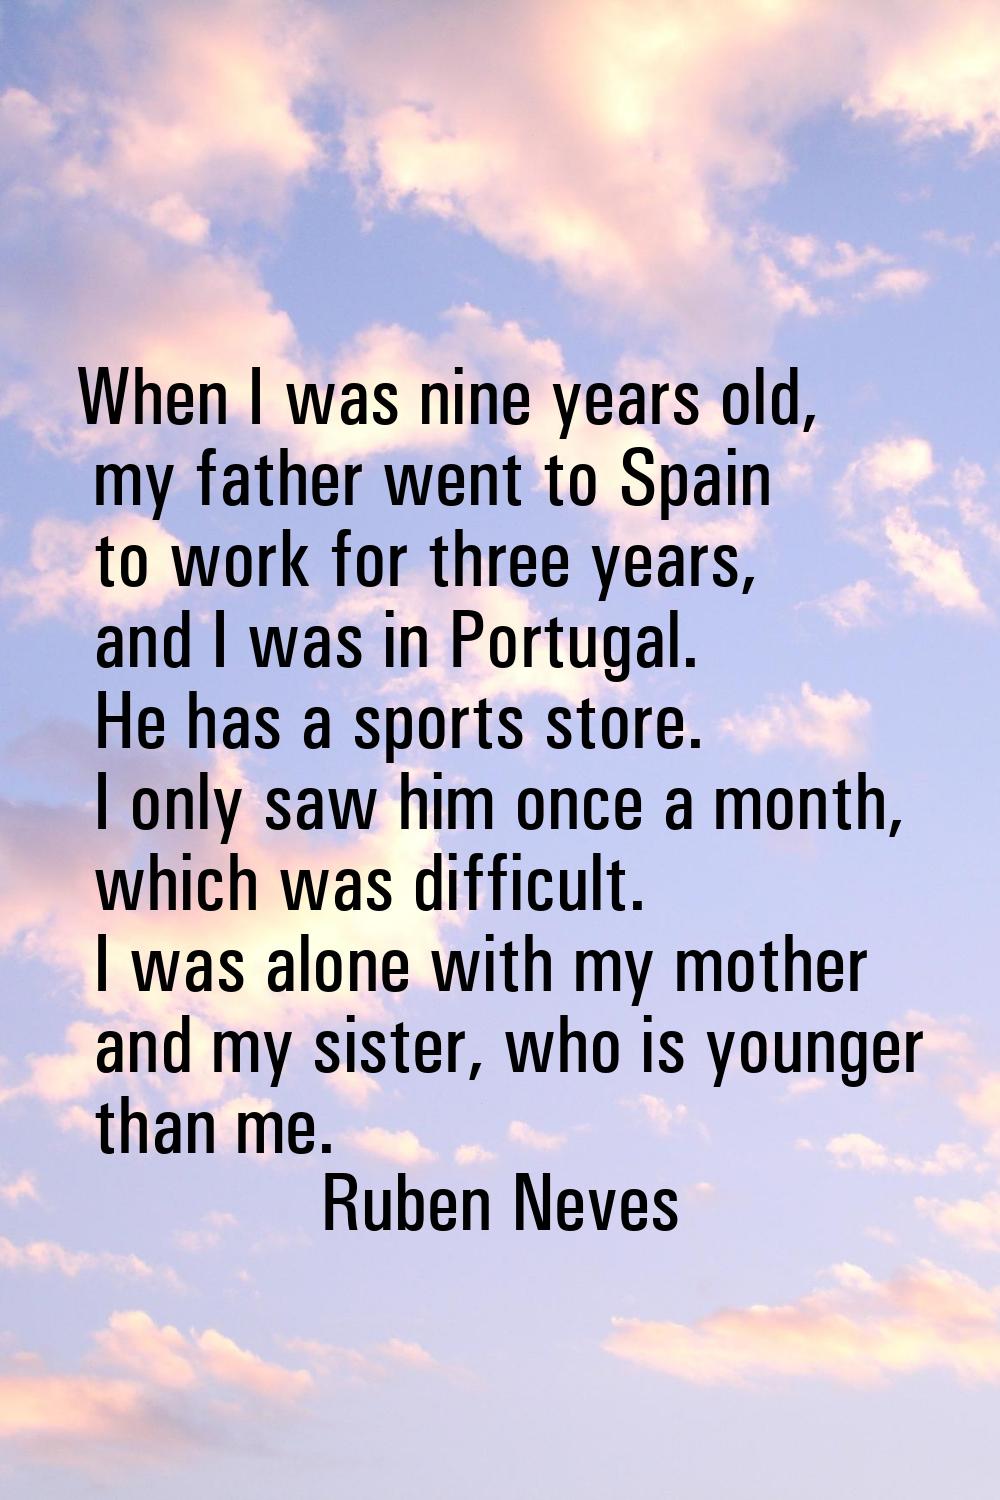 When I was nine years old, my father went to Spain to work for three years, and I was in Portugal. 